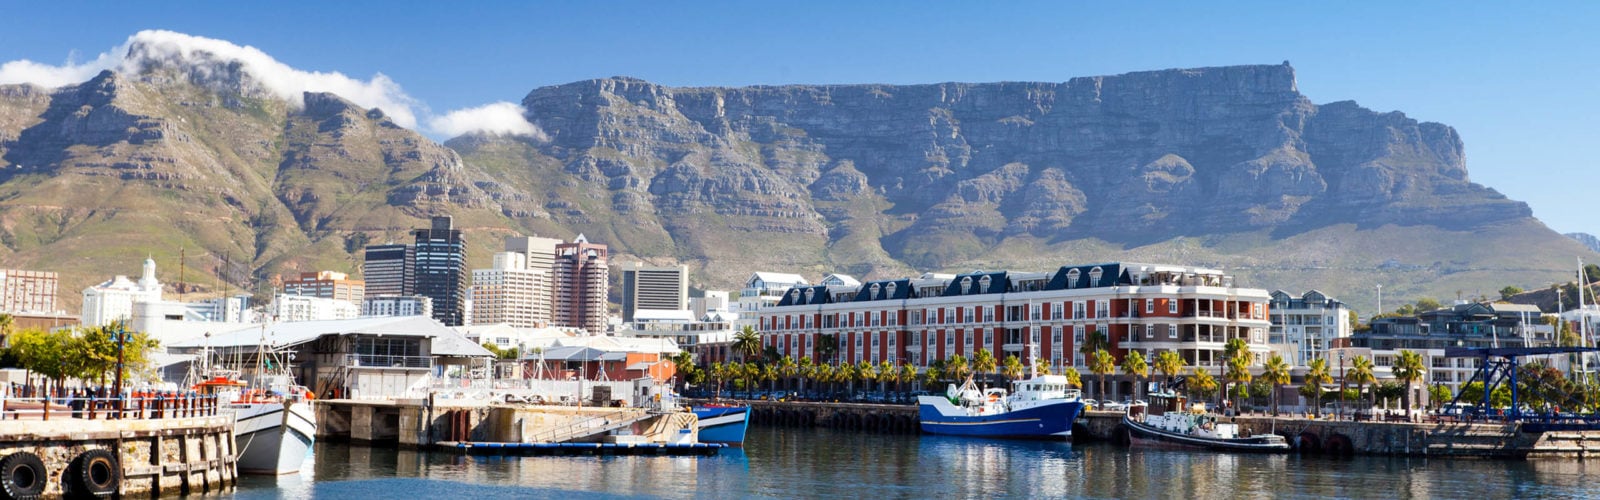 The Cape Town V&A Waterfront.